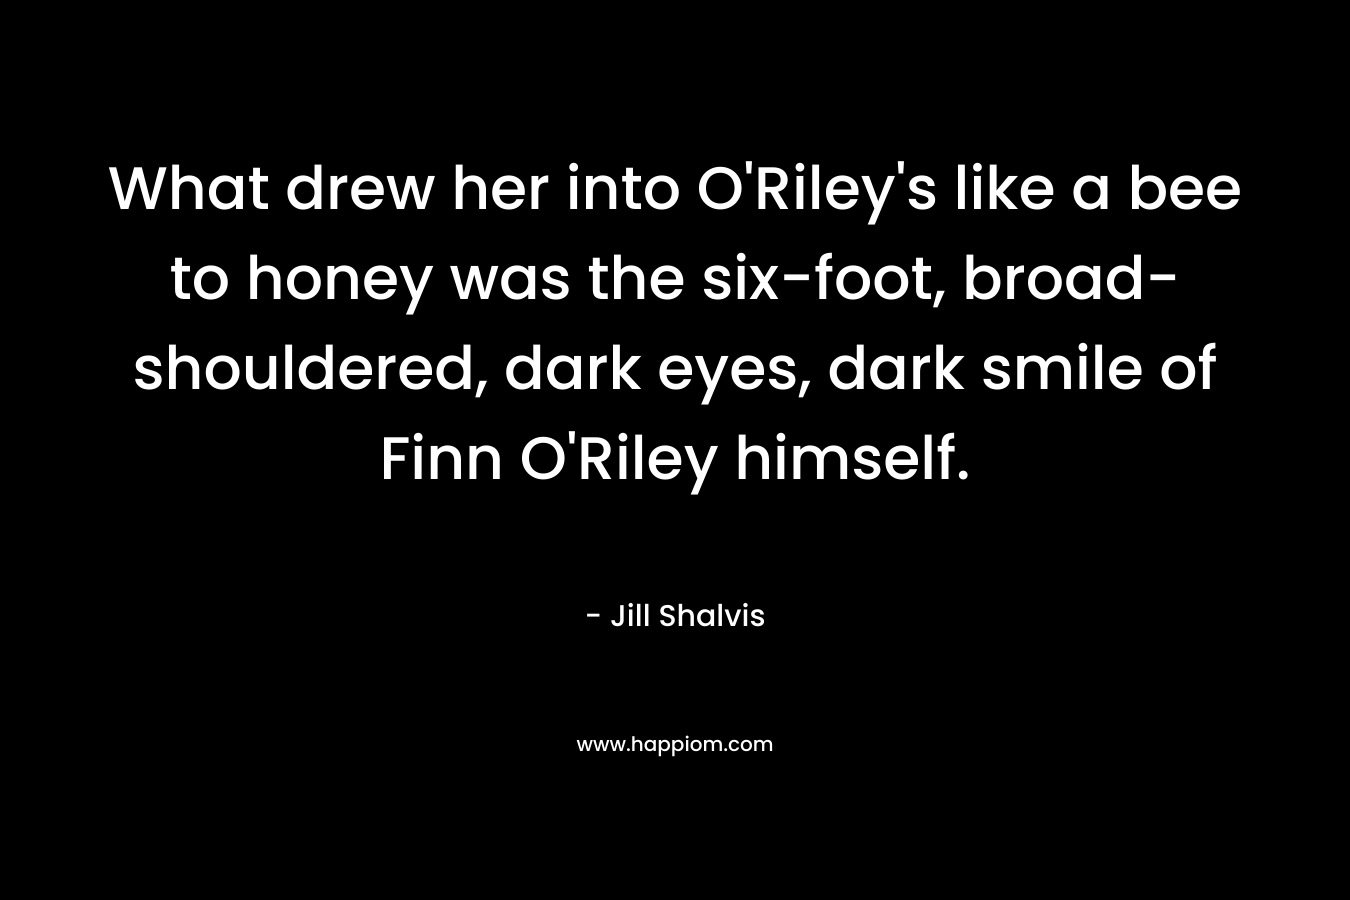 What drew her into O’Riley’s like a bee to honey was the six-foot, broad-shouldered, dark eyes, dark smile of Finn O’Riley himself. – Jill Shalvis